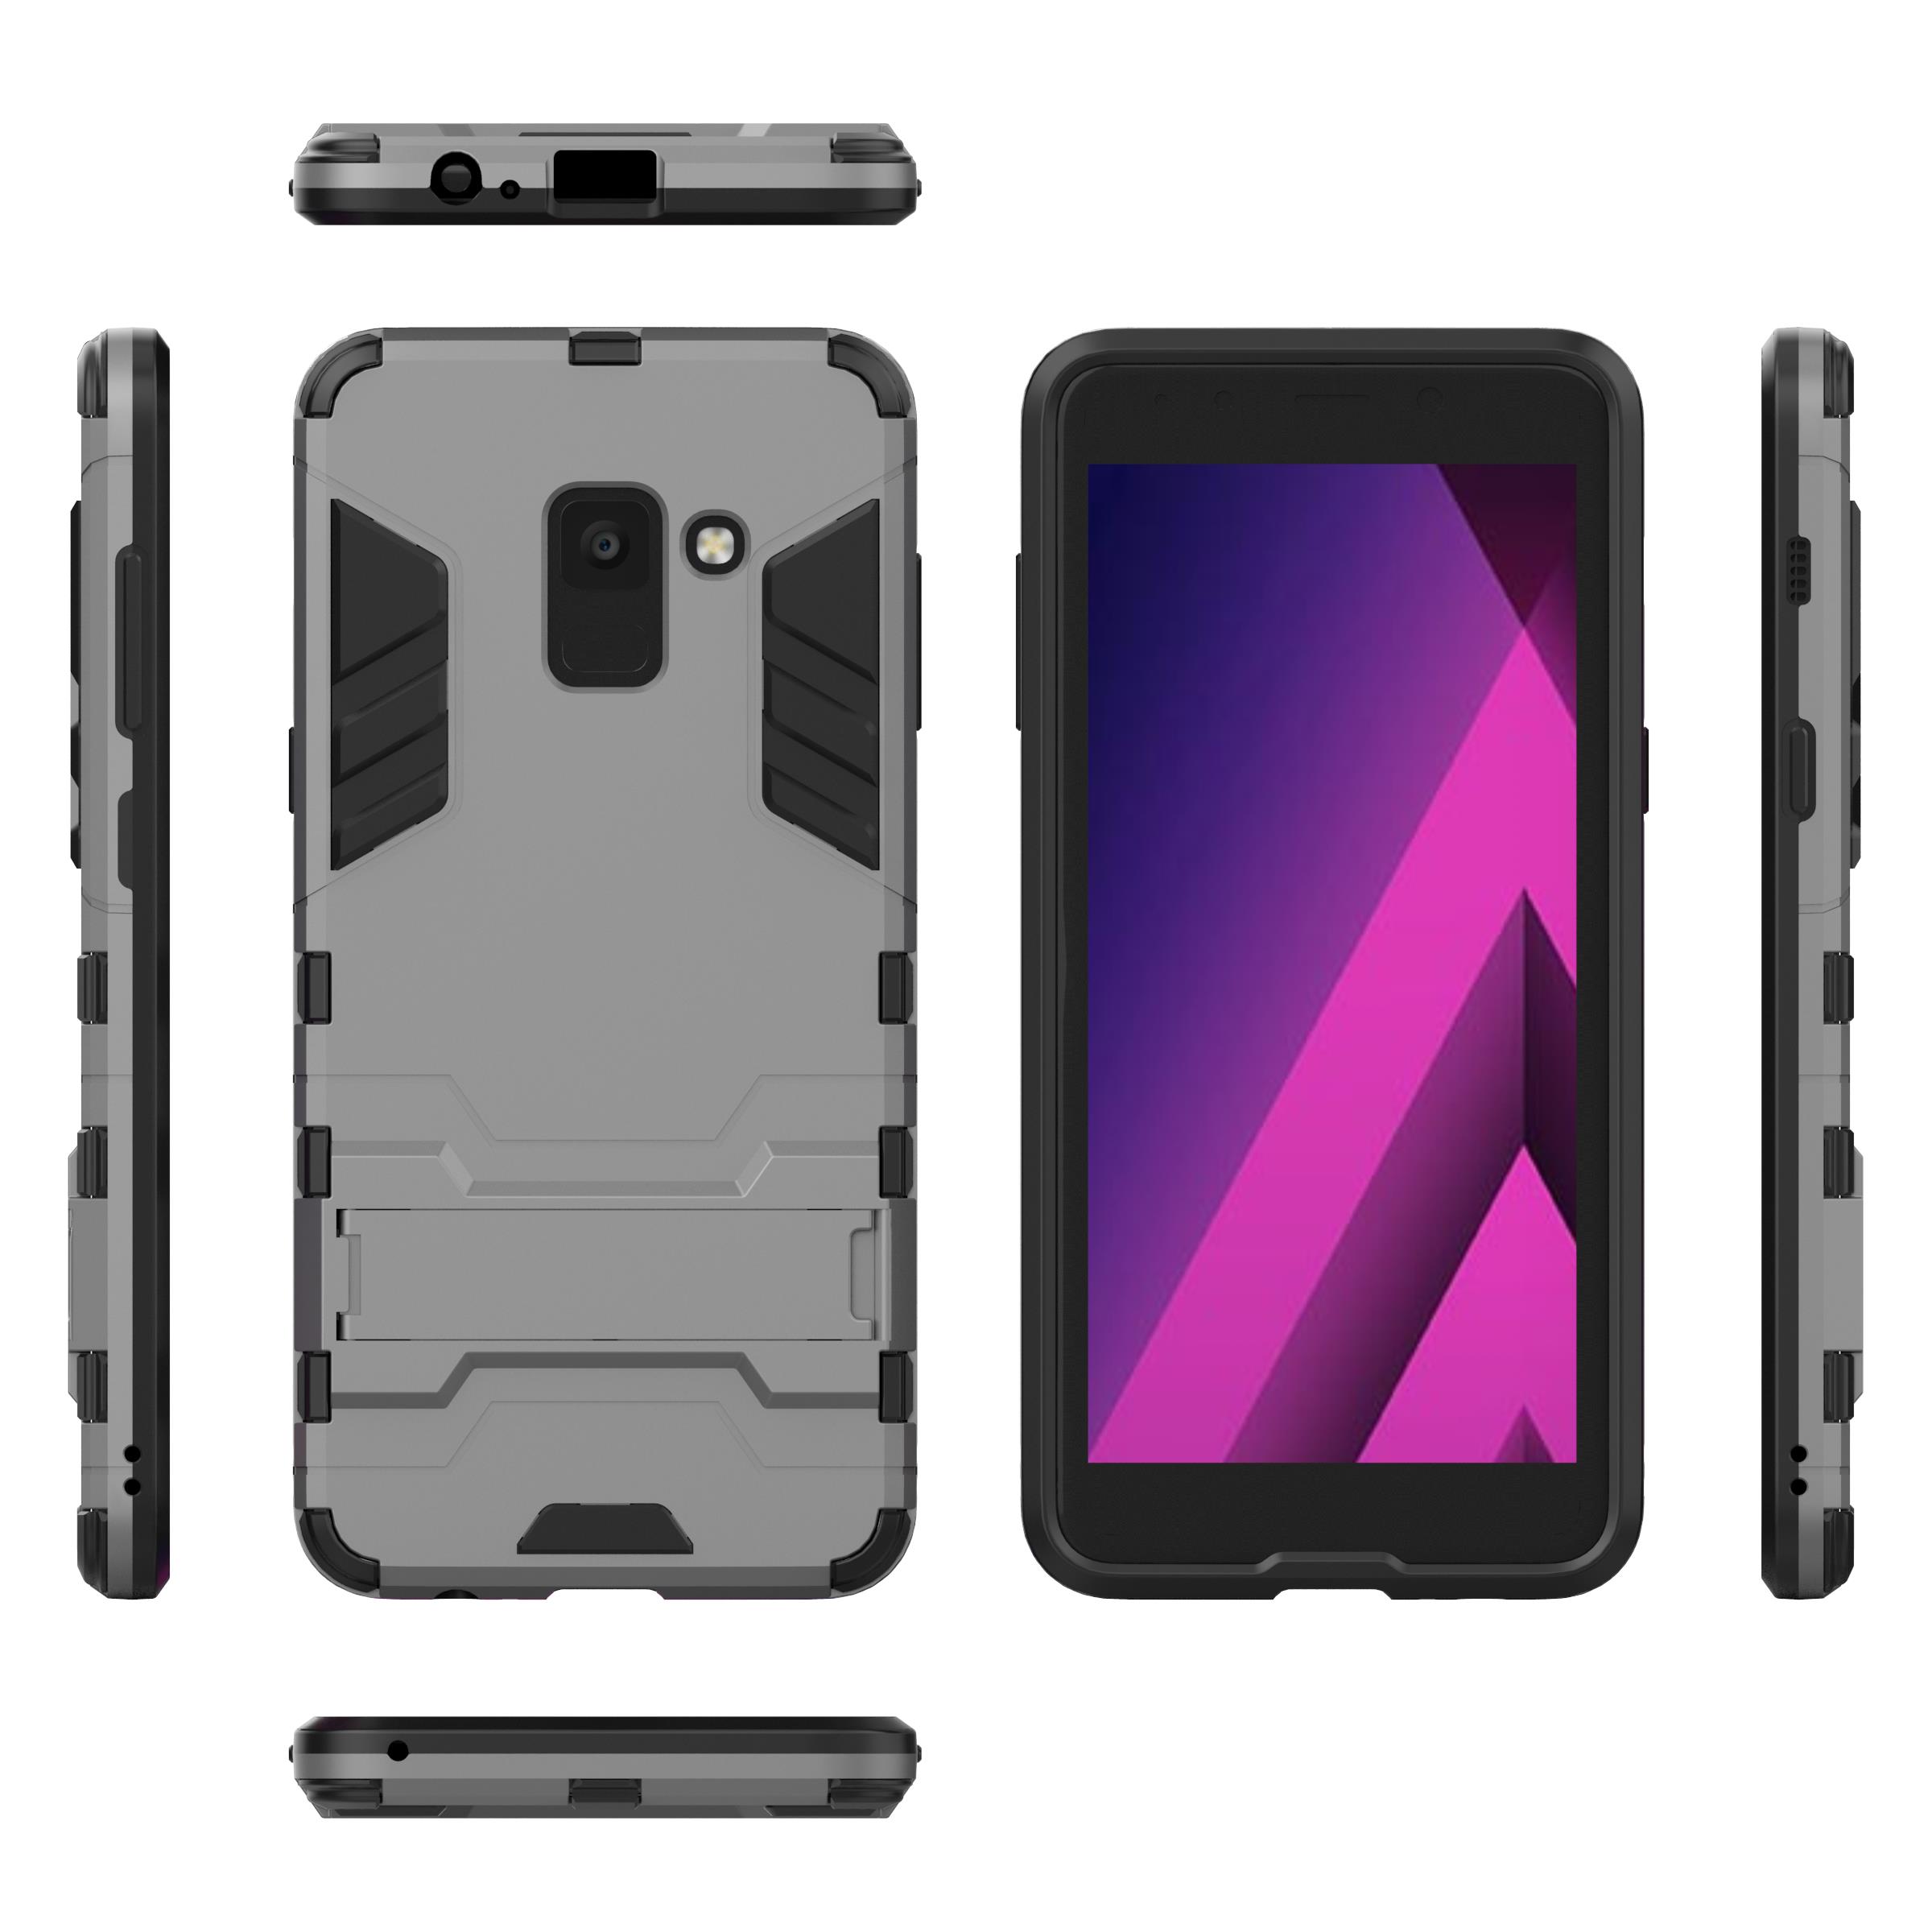 Bakeey-2-in-1-Armor-Kickstand-Hard-PC-Protective-Case-for-Samsung-Galaxy-A8-Plus-2018-1297009-3